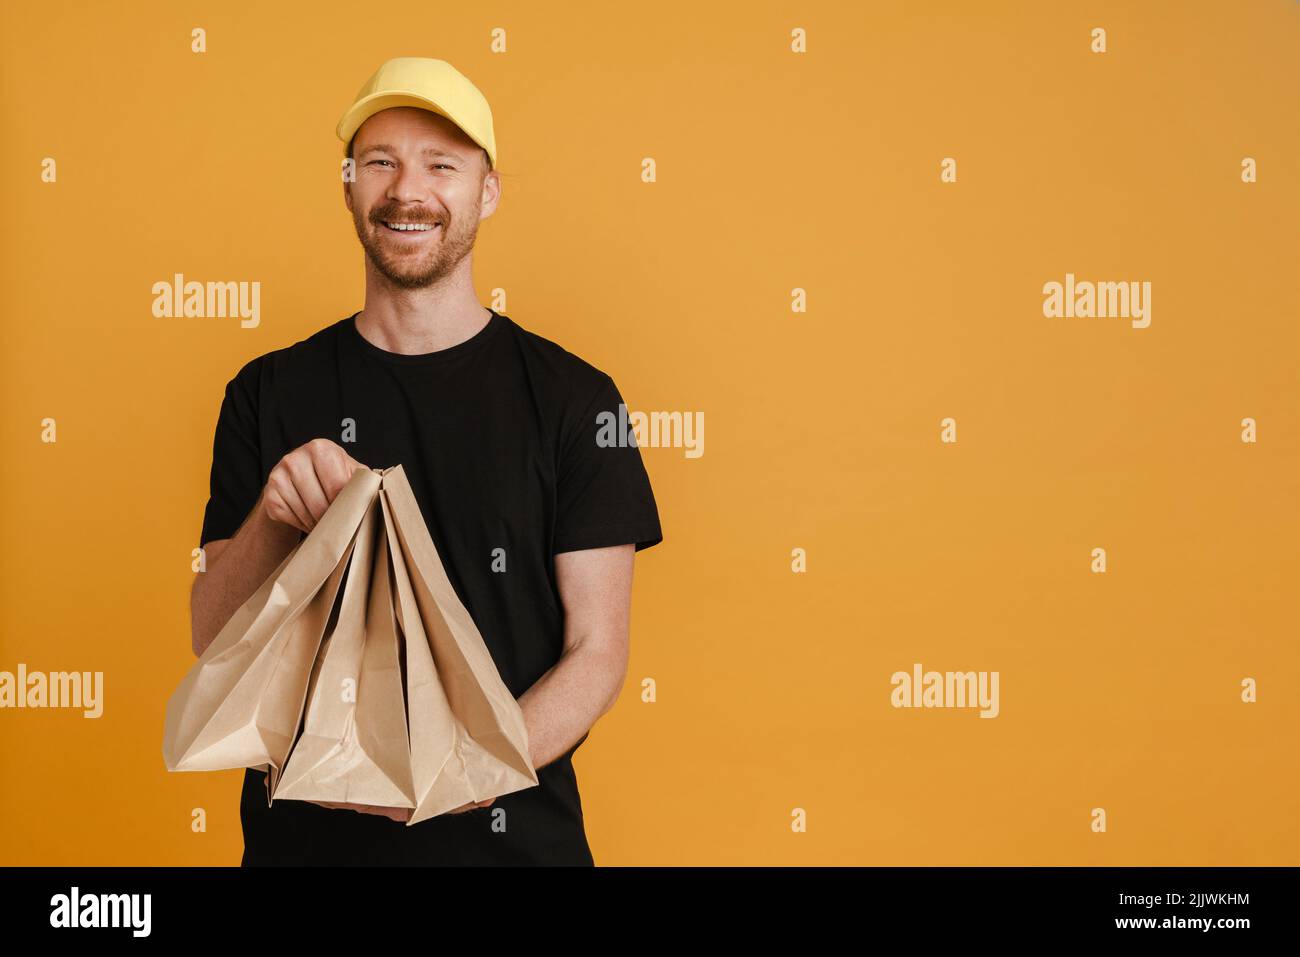 White delivery man in cap smiling while posing with paper bags isolated over yellow background Stock Photo